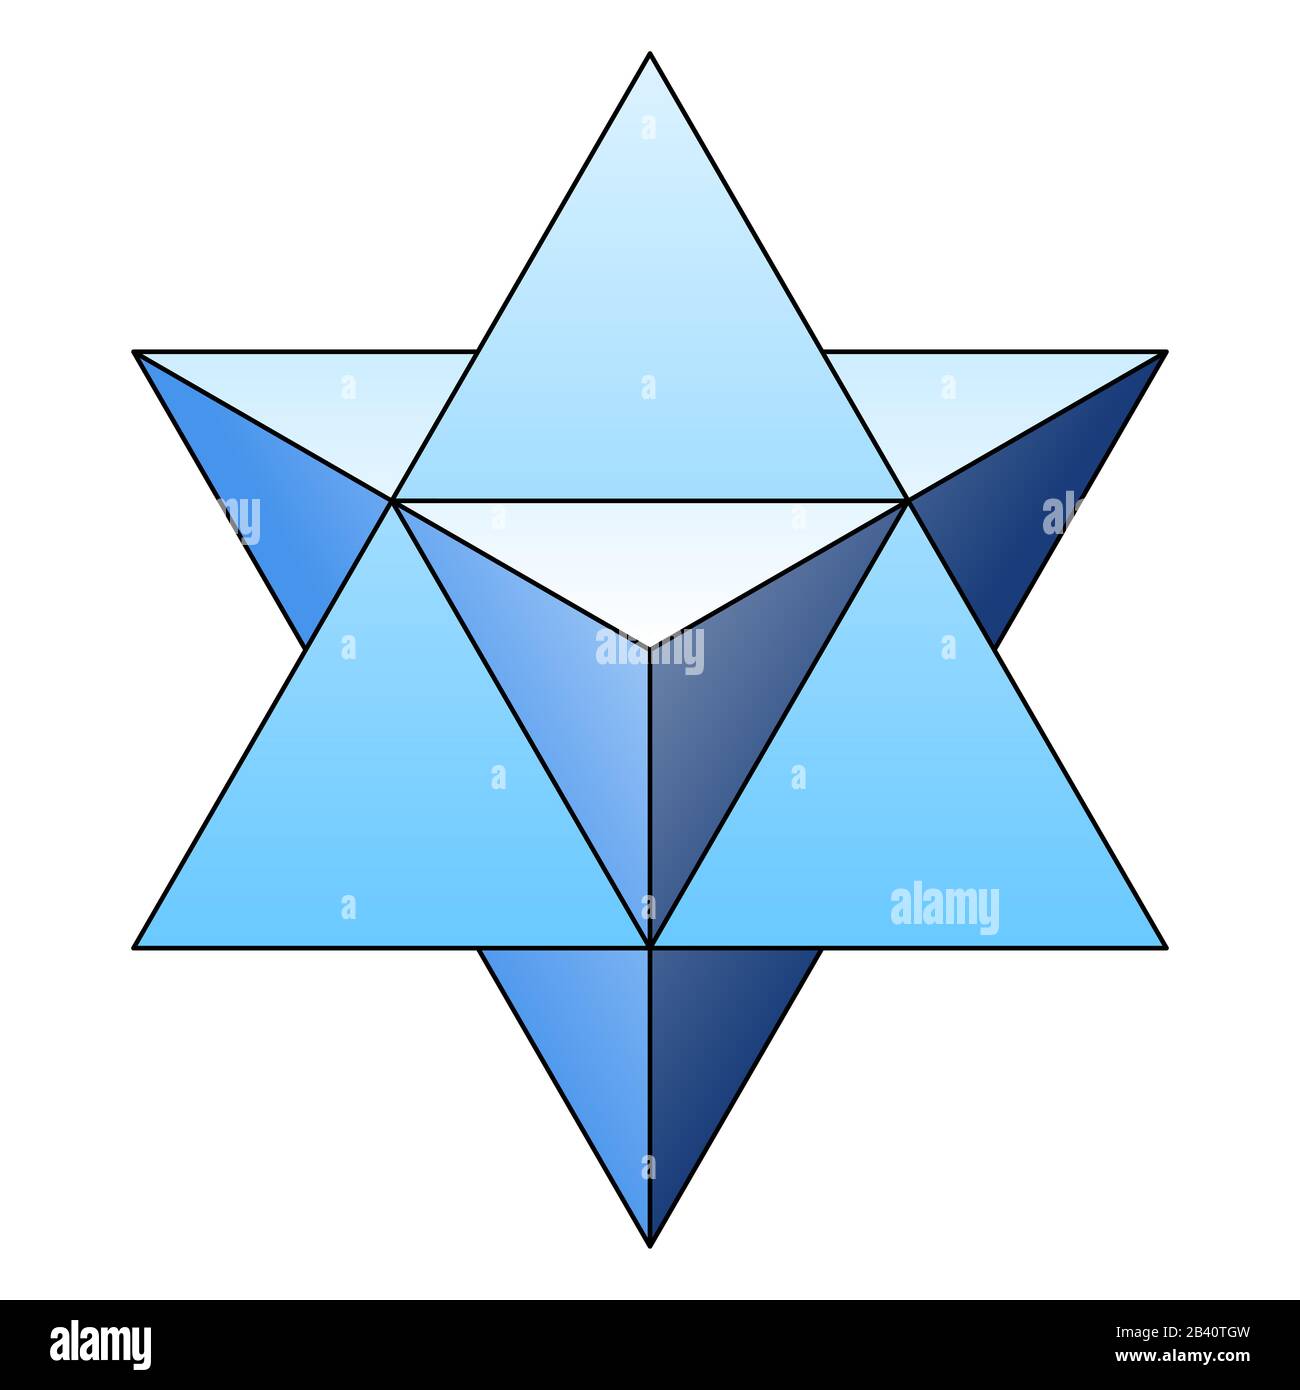 Blue star tetrahedron, also called Merkaba or Mer-Ka-Ba. A stellated octahedron, or stella octangula, a 3D extension of the Star of David. Stock Photo